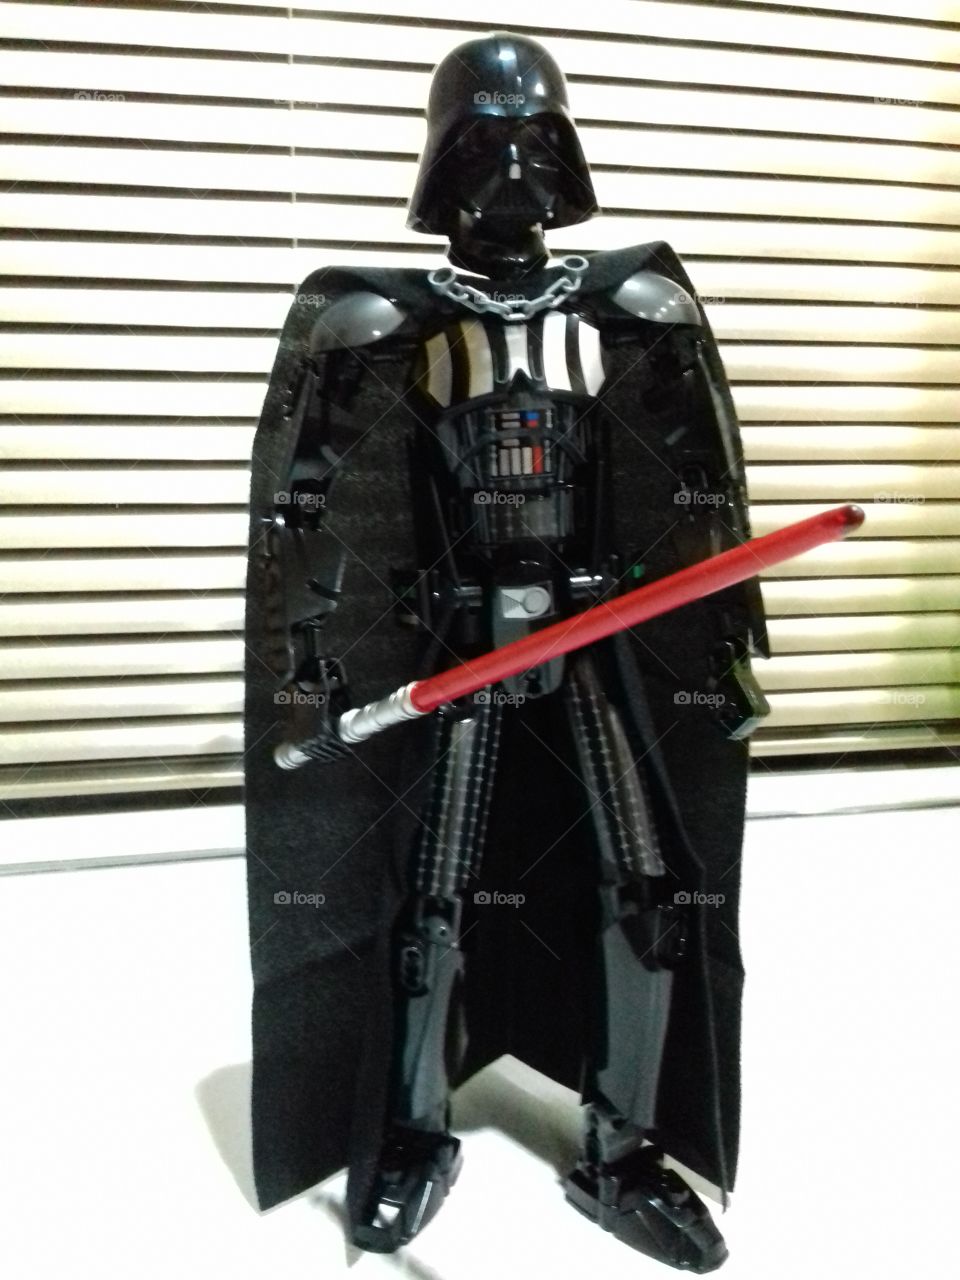 Formal product from LEGO group- LEGO Star Wars buildable figure of Darth Vader